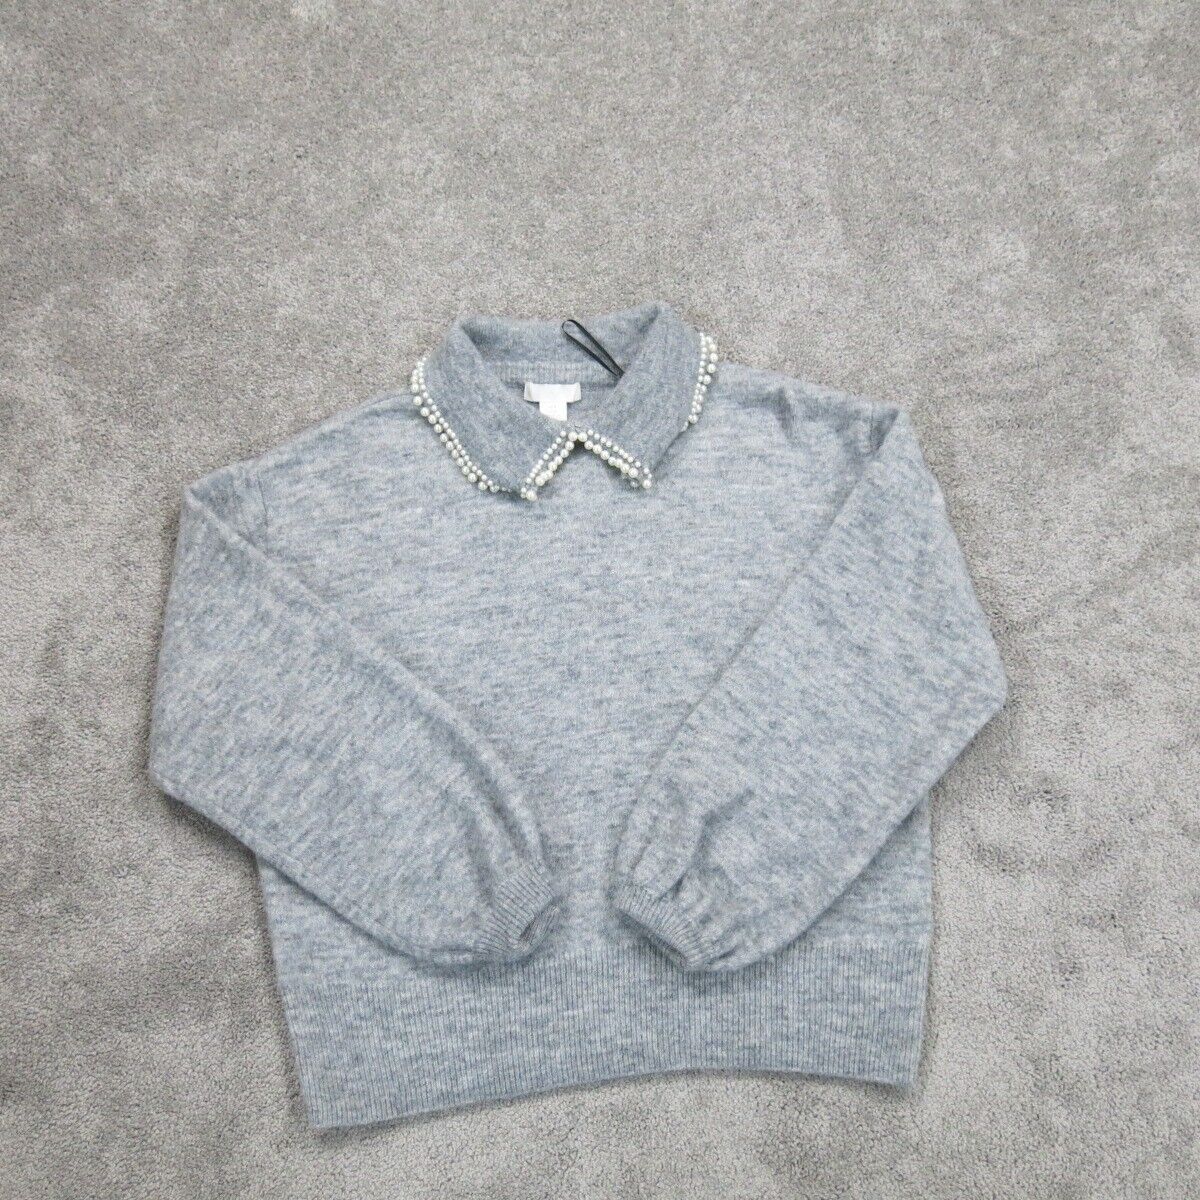 H&M Womens Knitted Pullover Sweater Collared Neck Long Sleeves Gray Size Medium